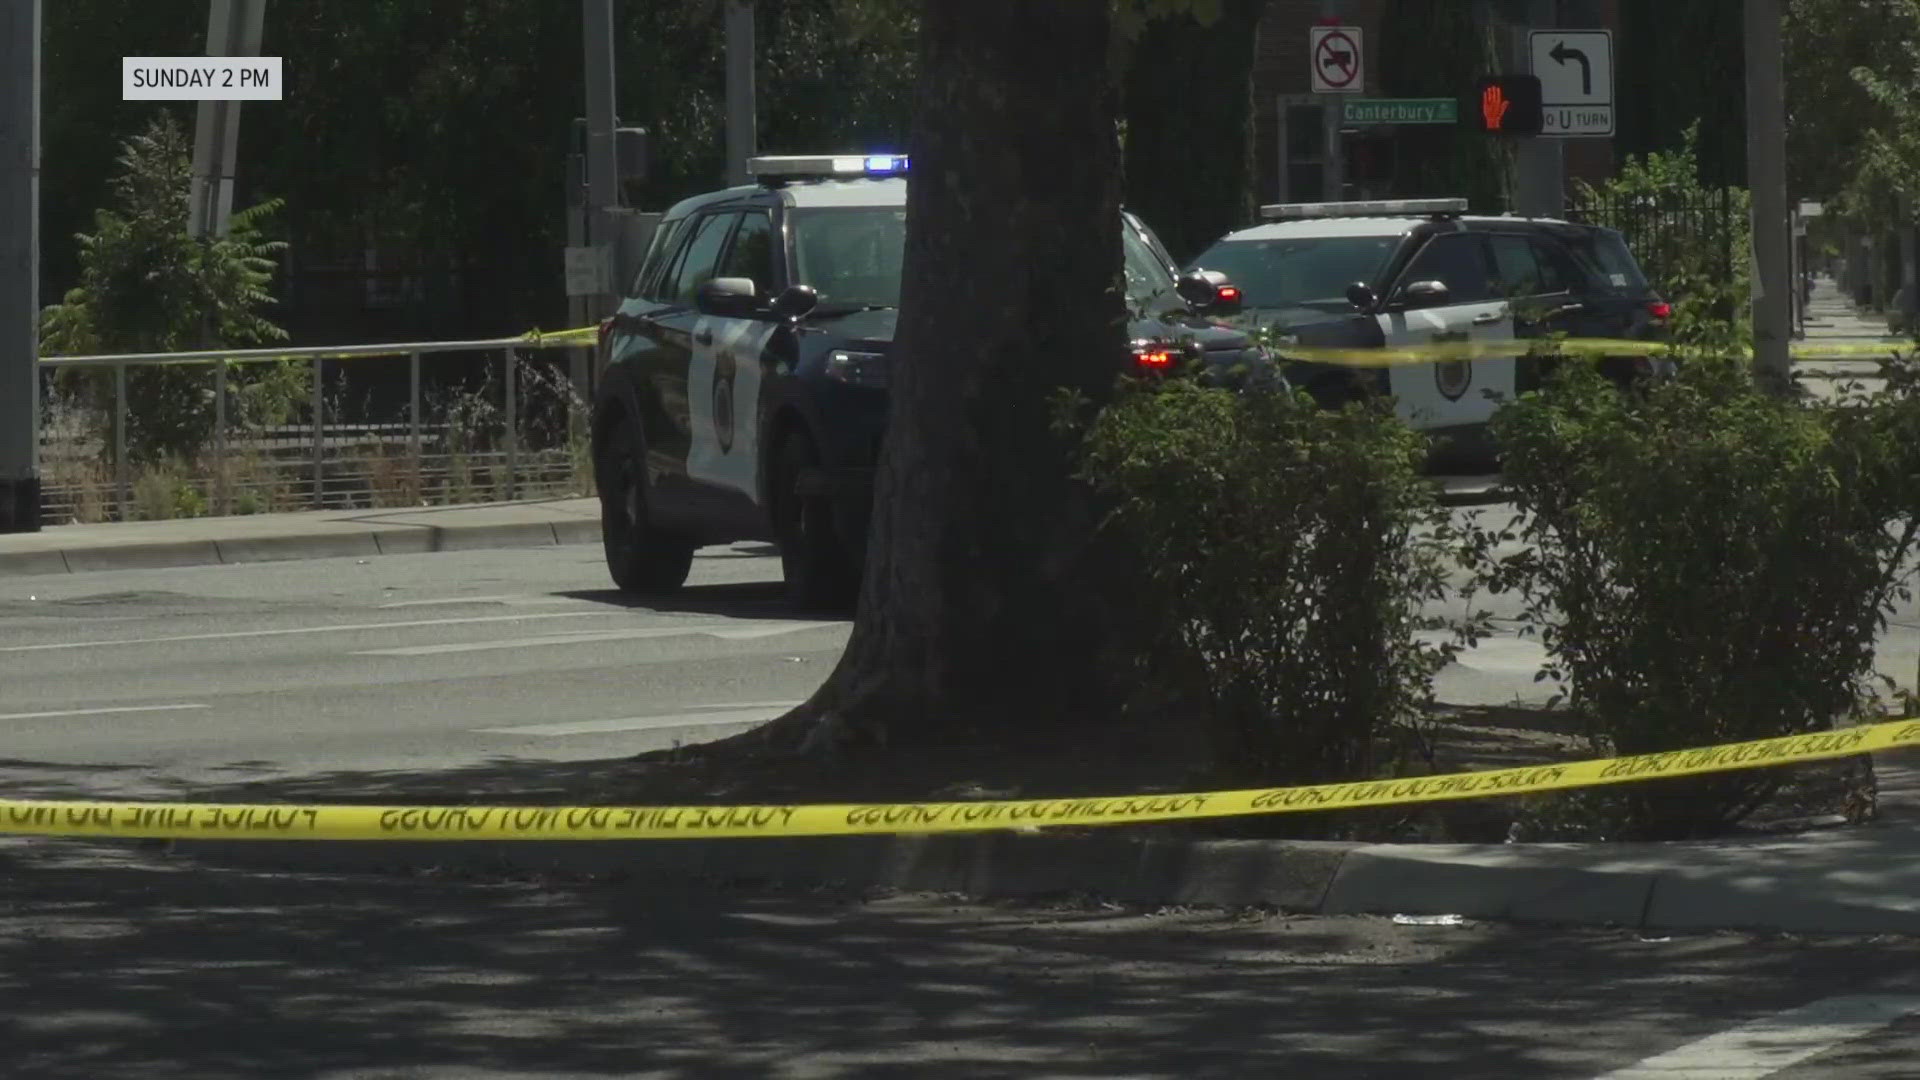 3 people were hurt and 1 person has died after four separate shootings in the Sacramento area.